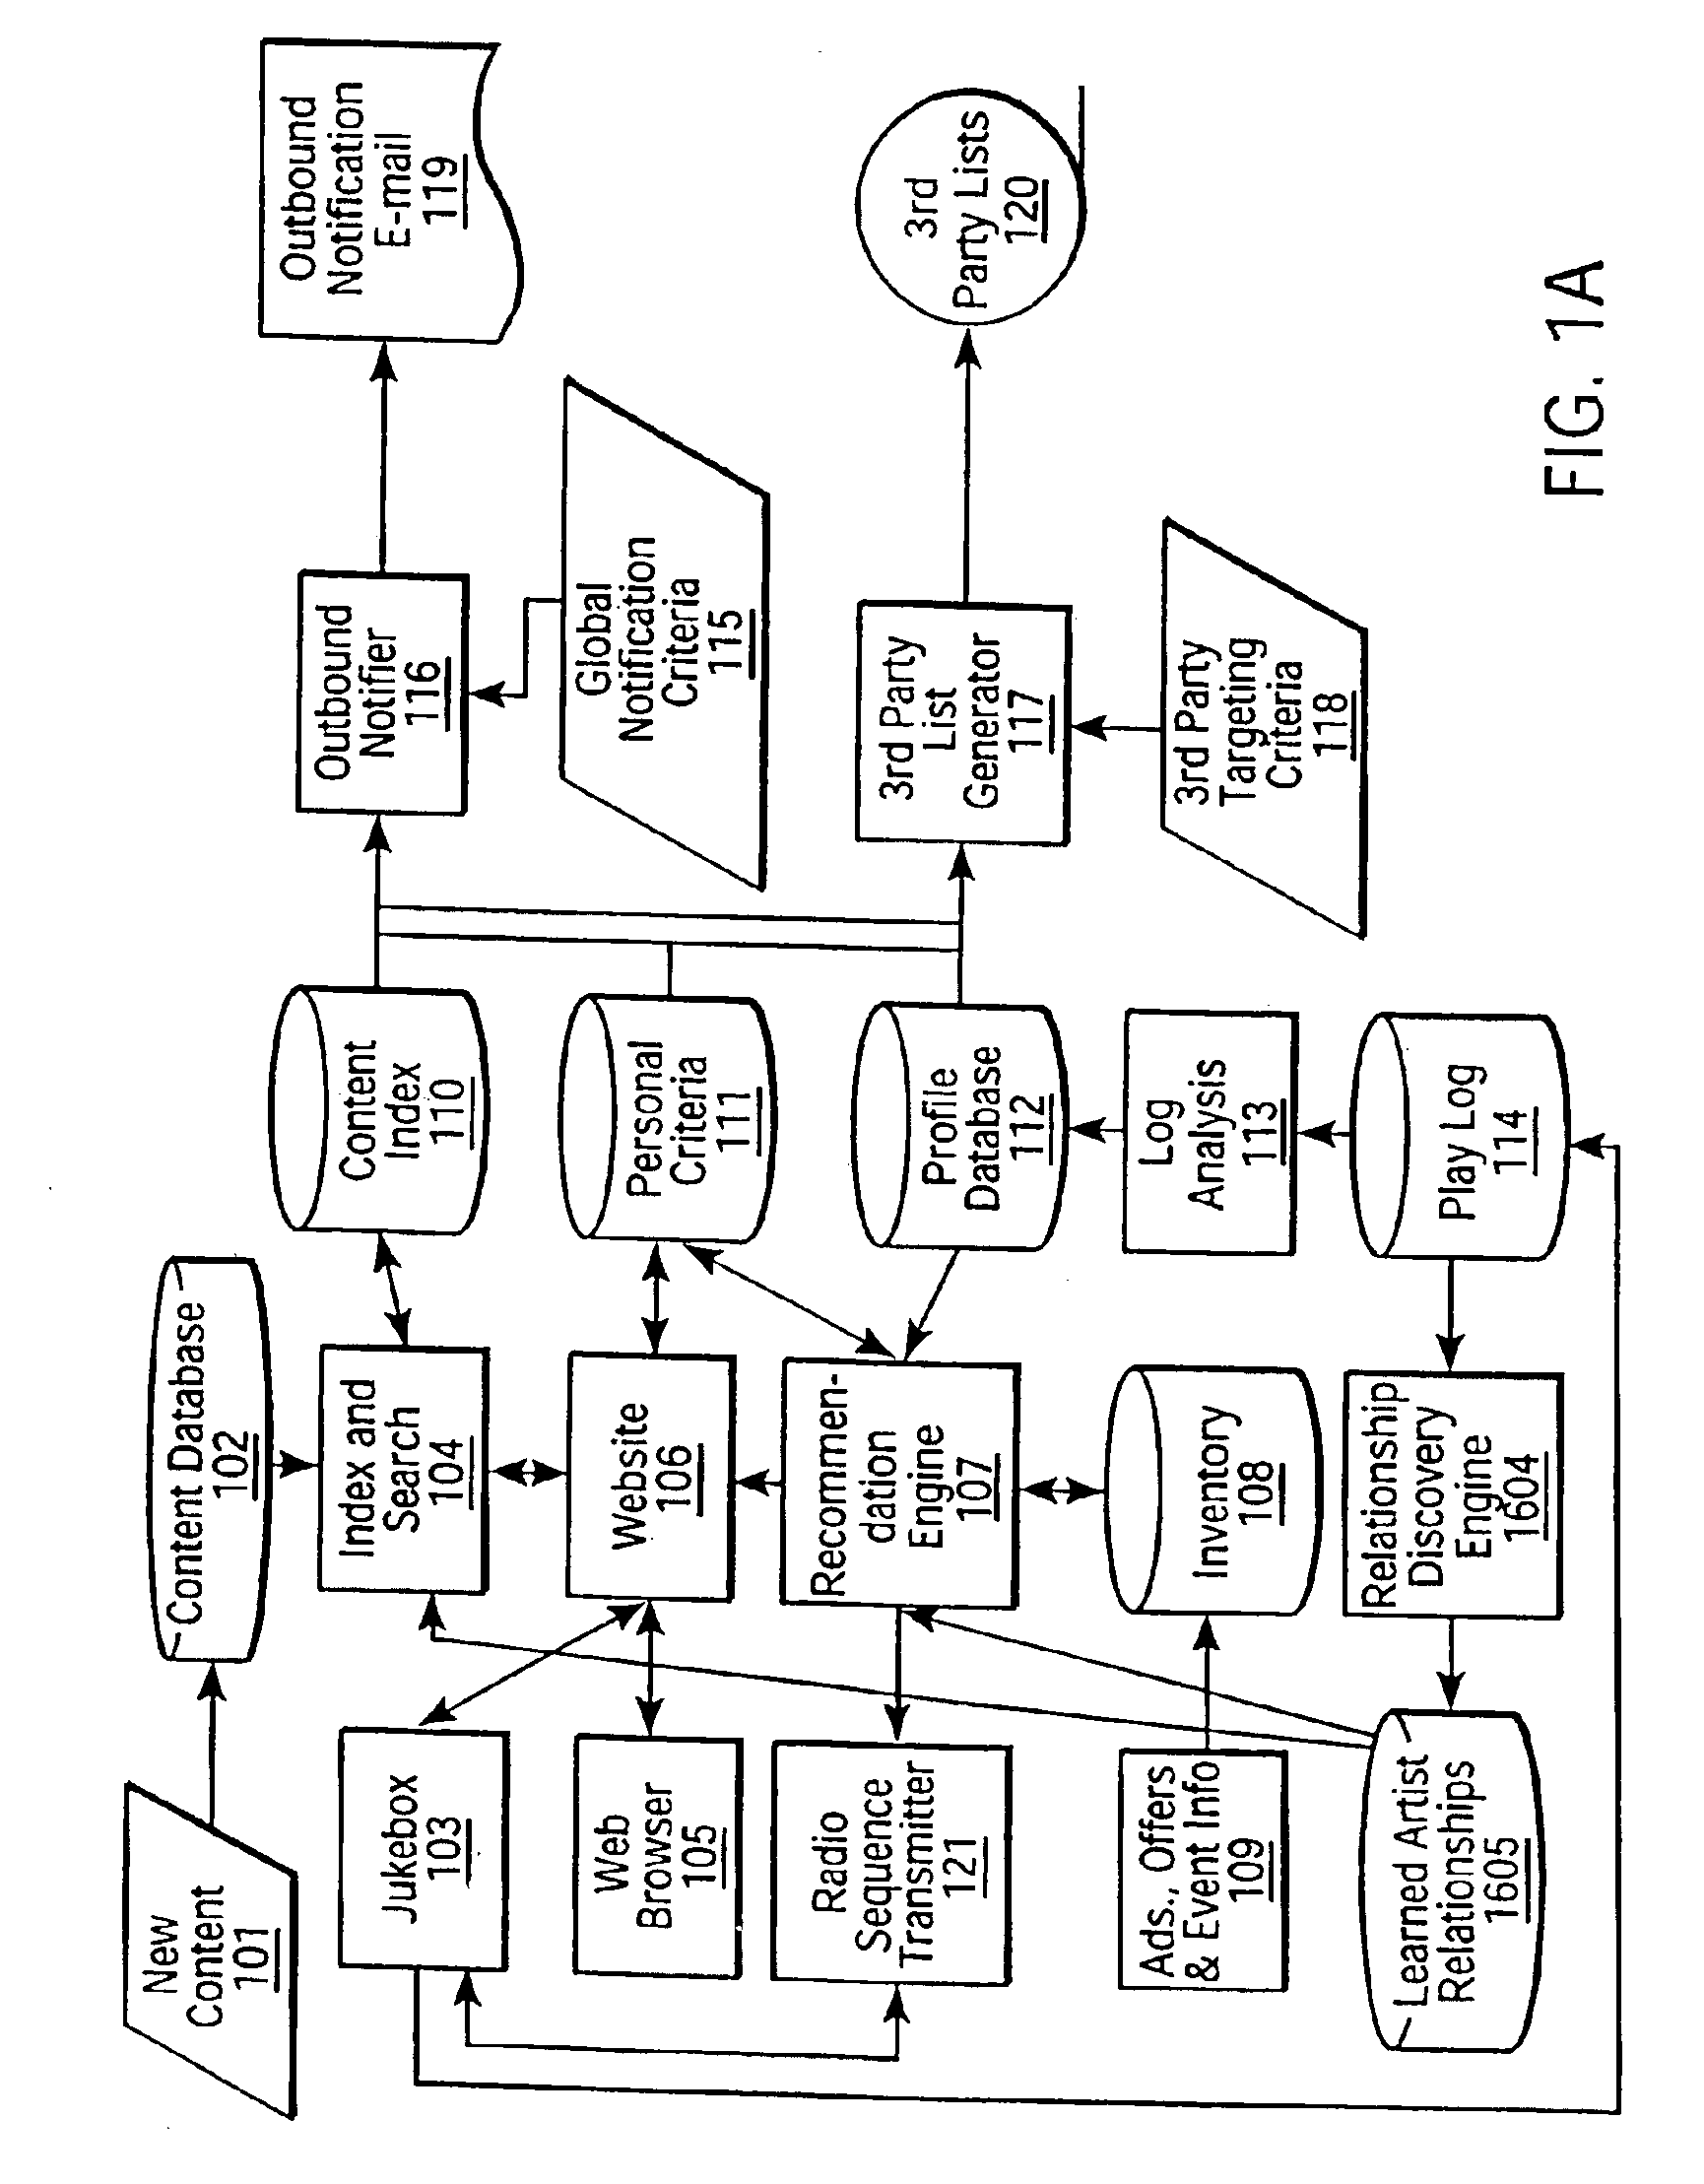 System for controlling and enforcing playback restrictions for a media file by splitting the media file into usable and unusable portions for playback